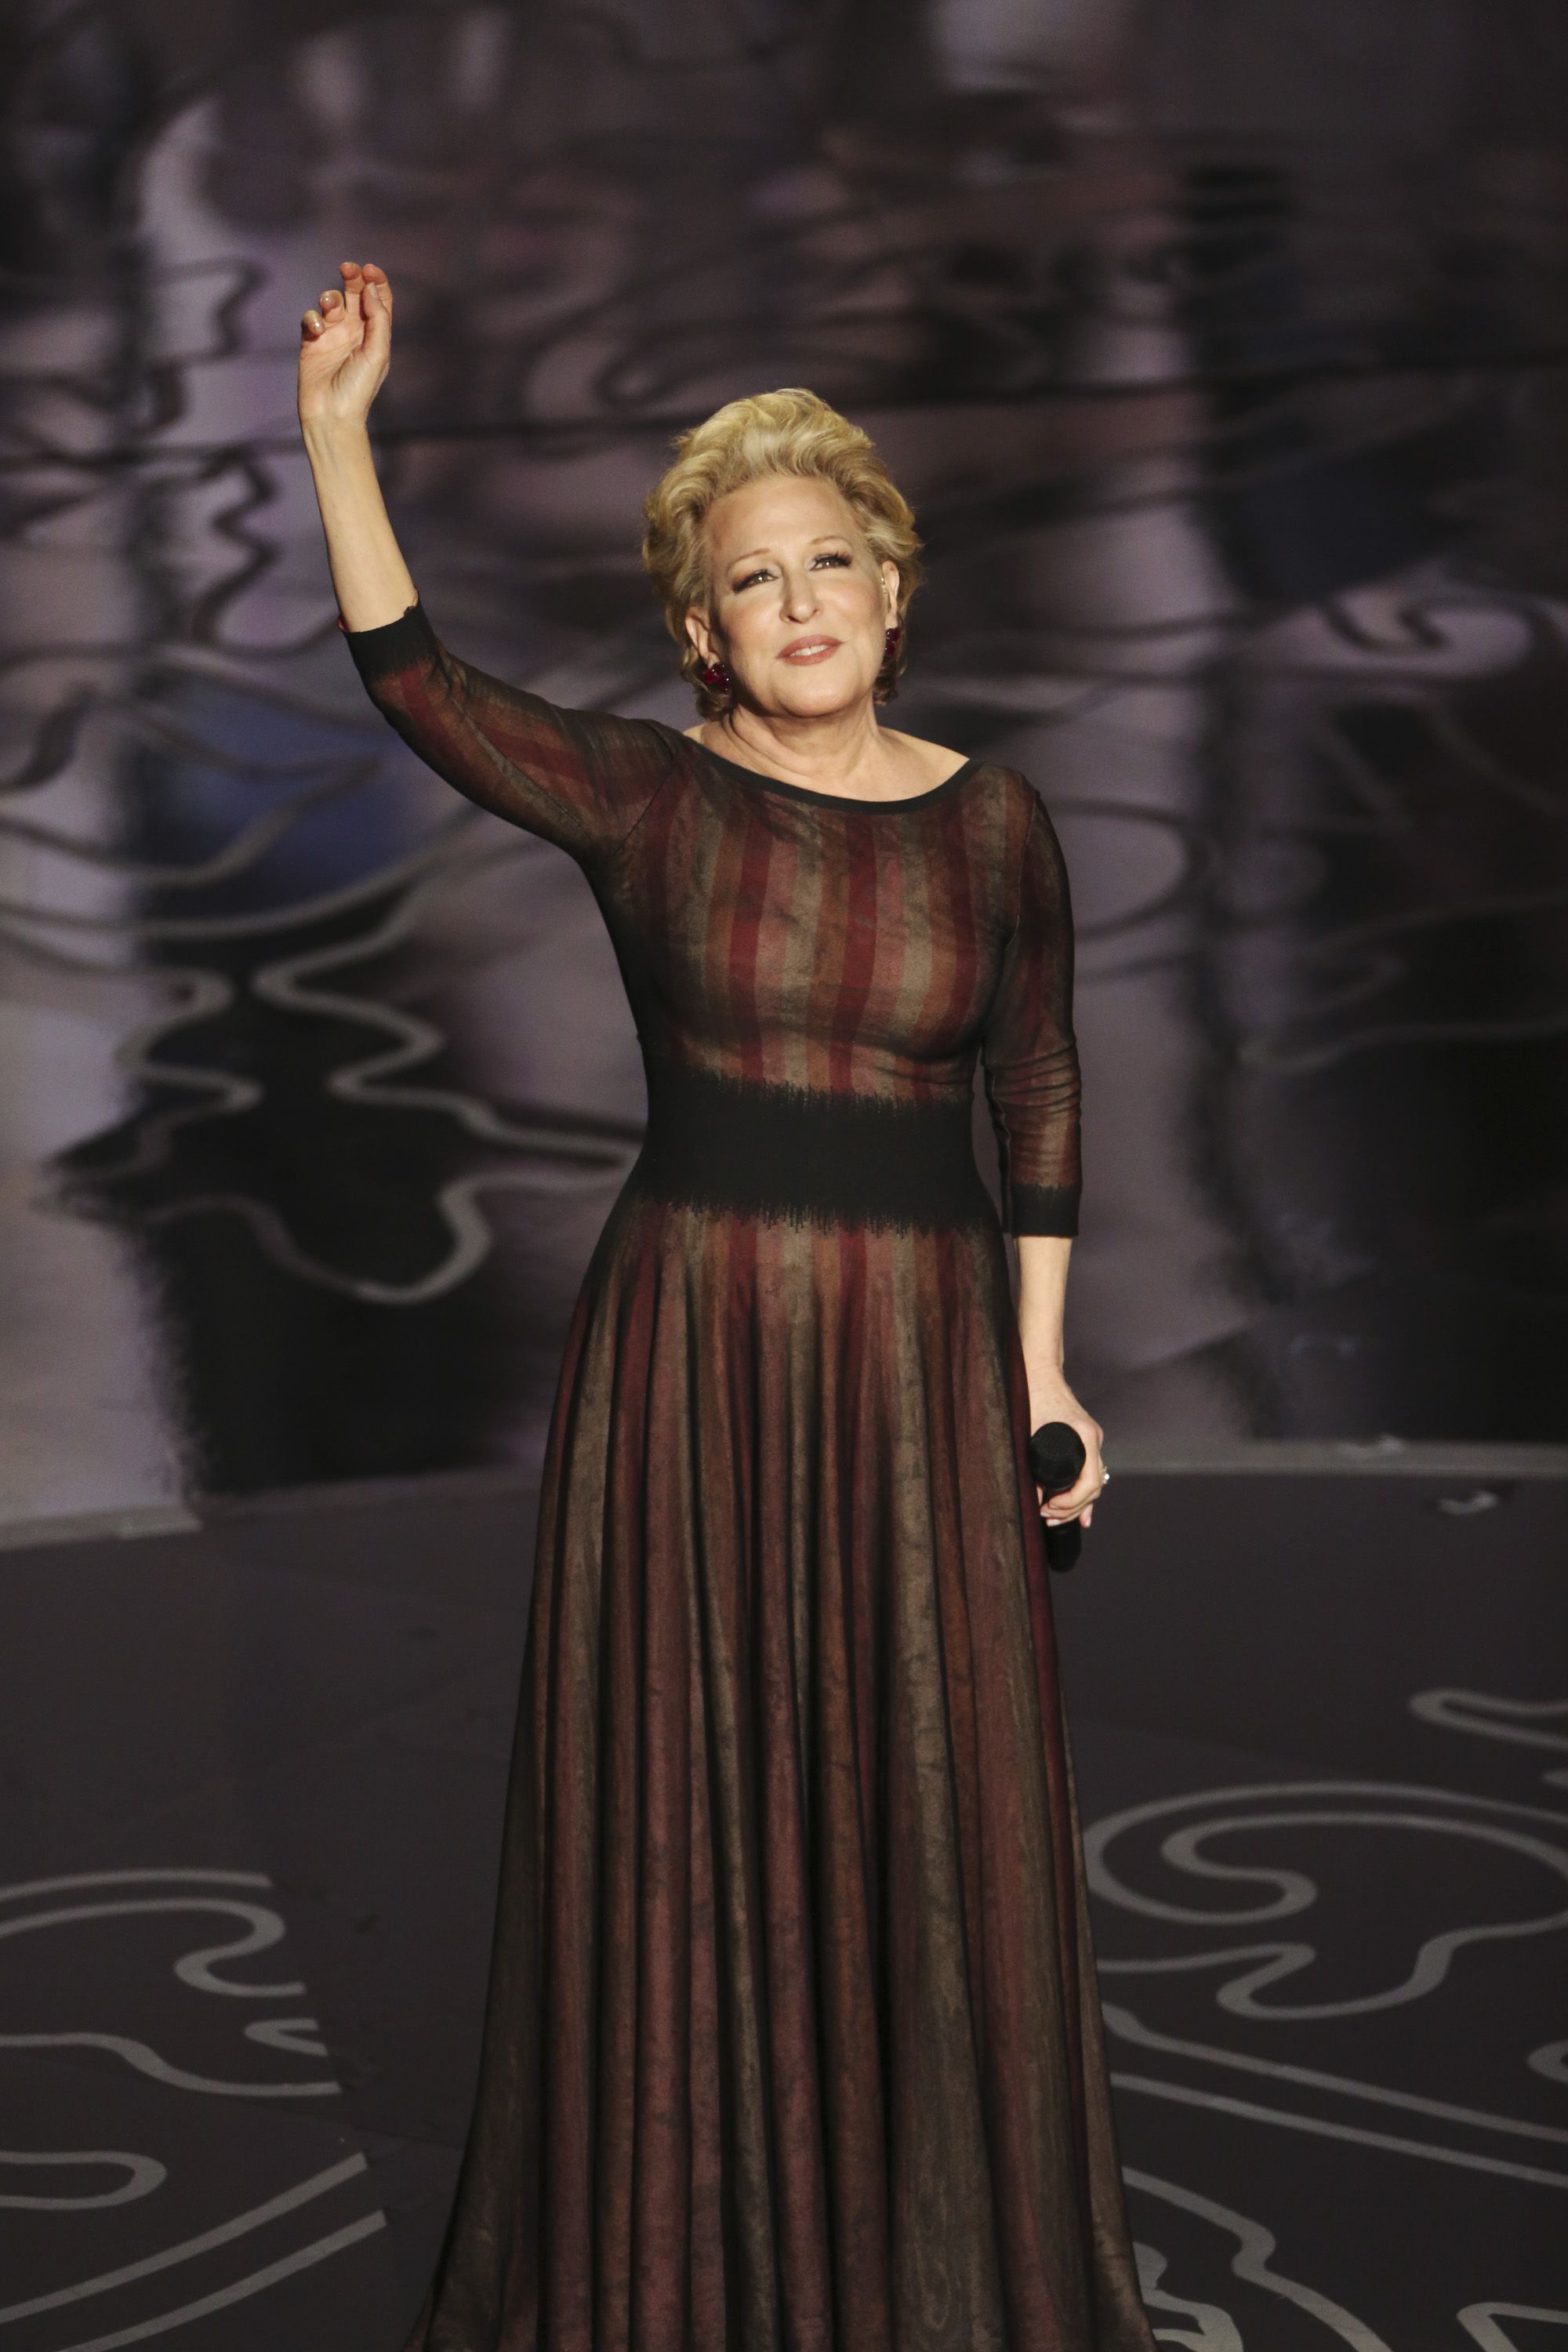 Oscars 2016: Bette Midler pulls no punches on the #OscarsSoWhite issue